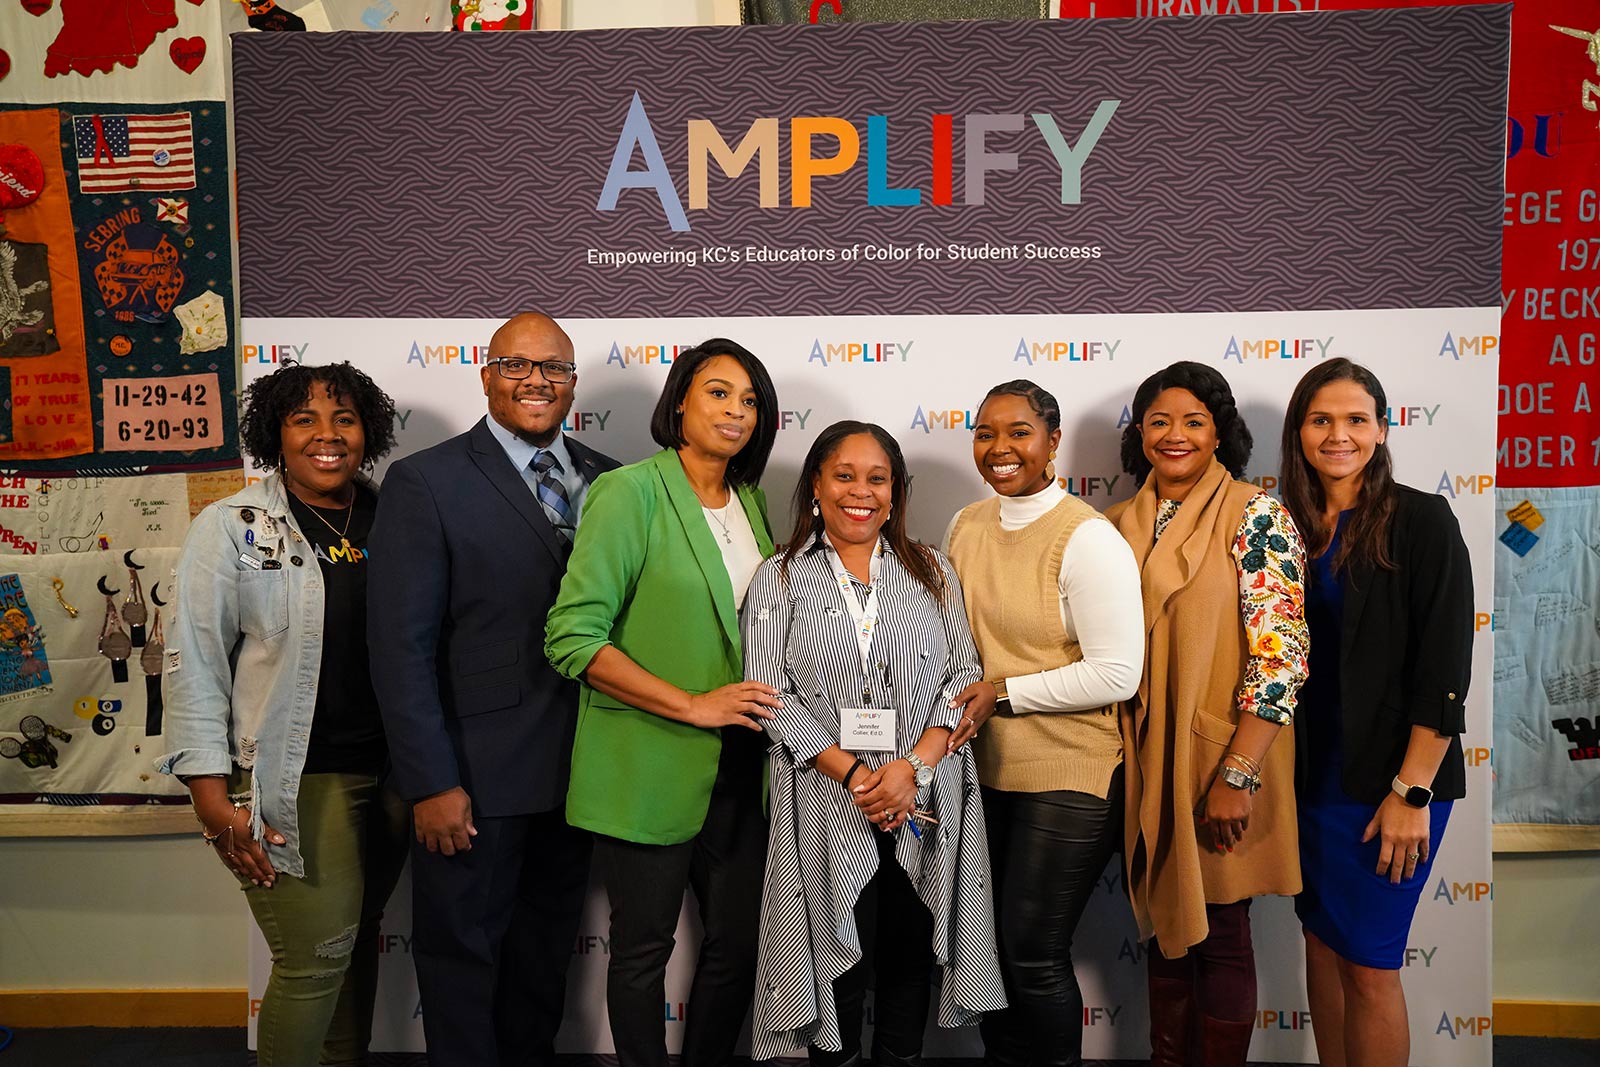 Seven people pose for a photo in front of a backdrop that says "Amplify" in multiple colors. 